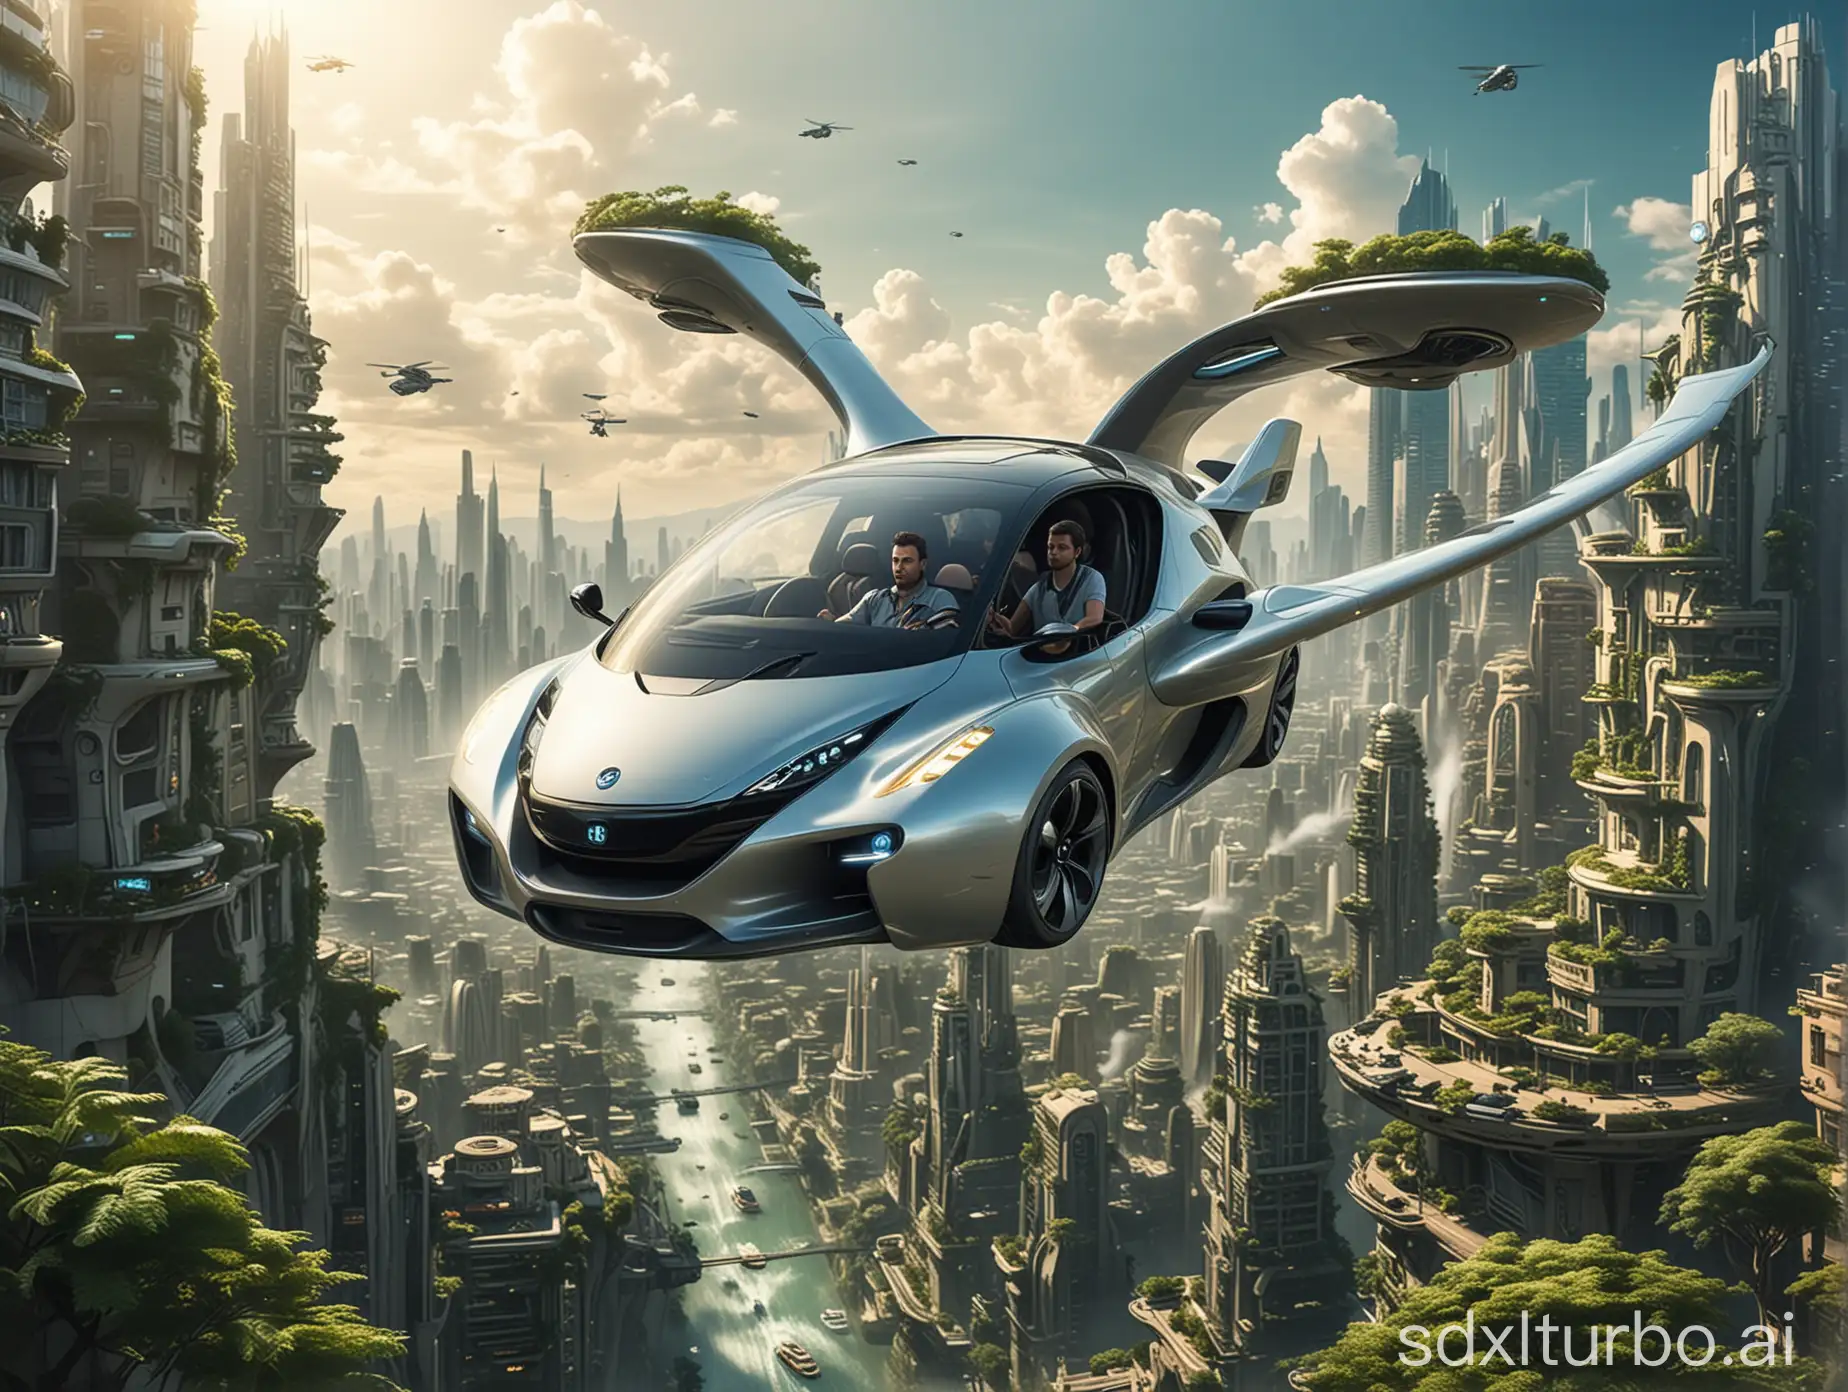 In a future city, a man returns home from work, sitting in a flying car flying over the futuristic technological city. The city should be full of a sense of technology, with architectural firms and neat vegetation. There should be a sense of technology and science fiction, with more details about the interior of the flying car.